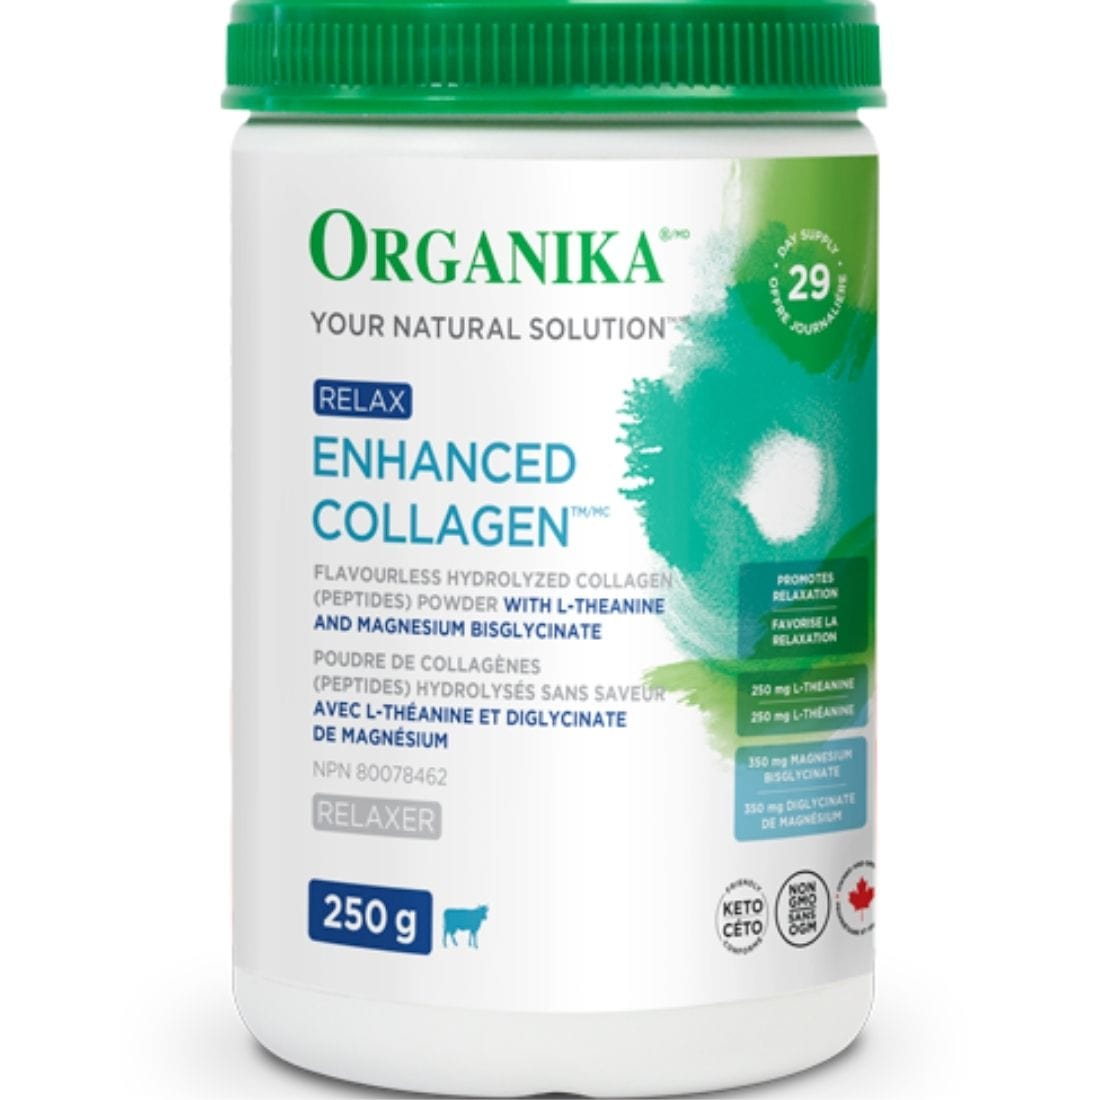 Organika Enhanced Relax Collagen with Magnesium & L-Theanine (Flavourless Hydrolyzed Collagen Peptides), 250g